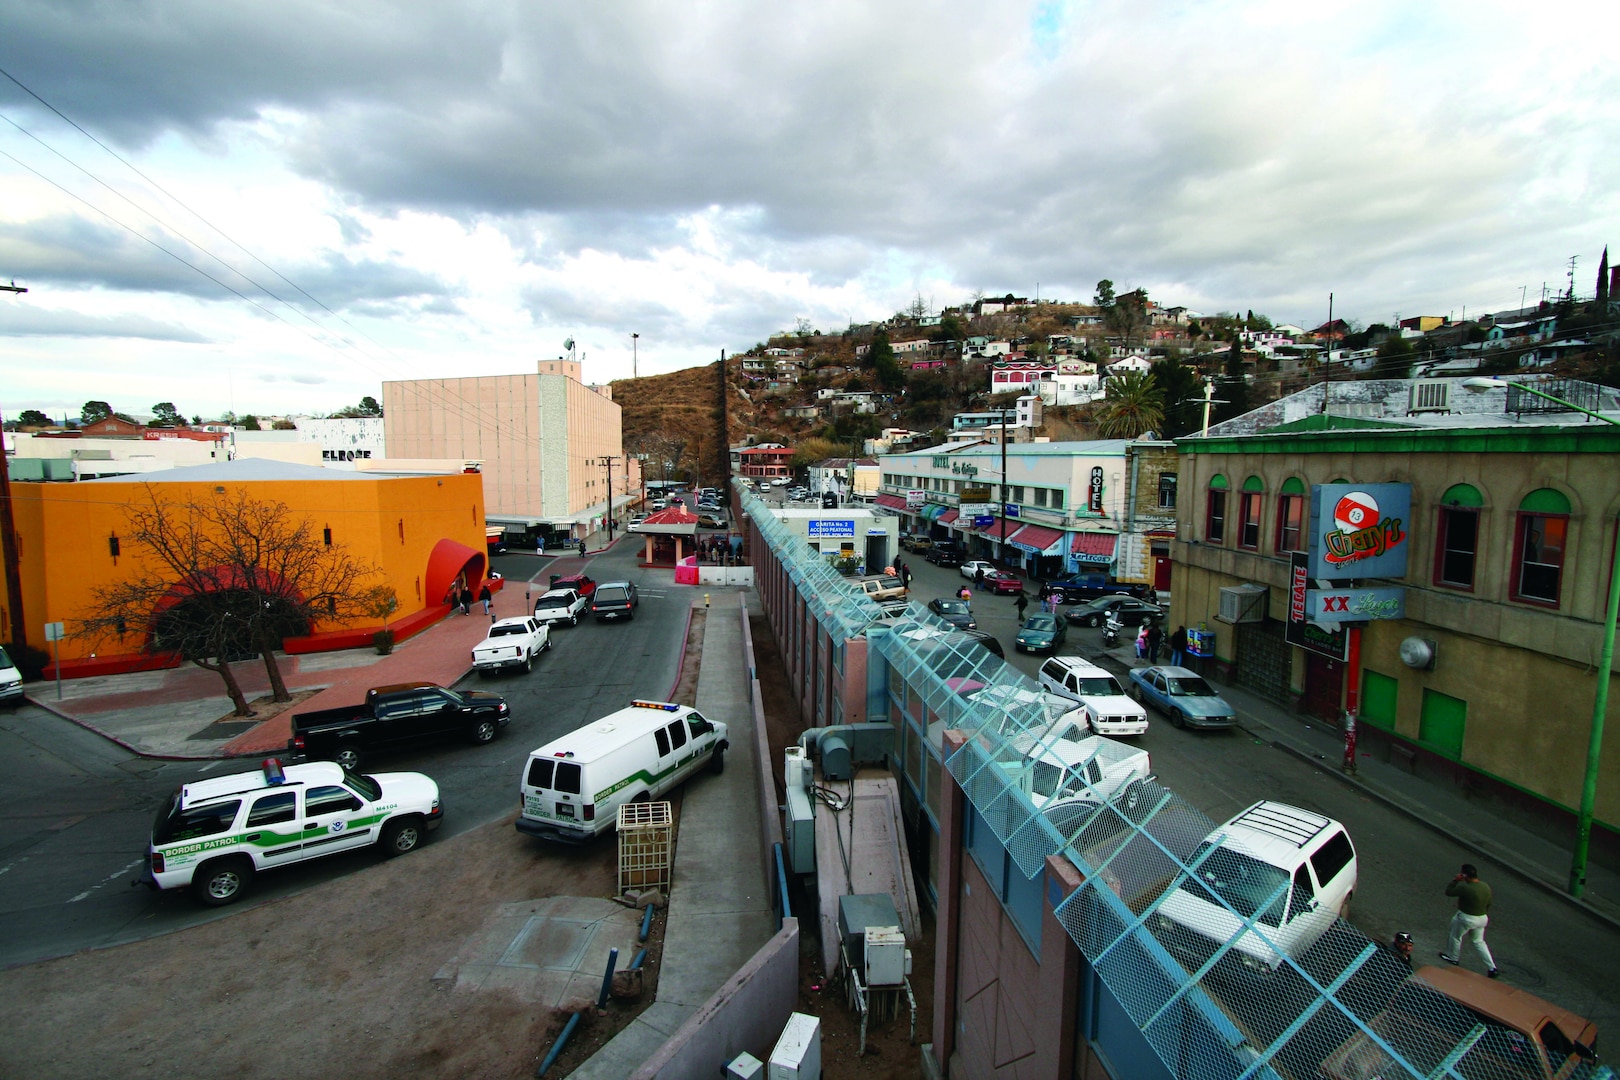 The towns of Nogales, Ariz., left, and Nogales, Mexico, stand separated by a high concrete and steel fence, Thursday, Jan. 18, 2007. Many consider the area one of the most dangerous along the border with numerous reports from U.S. Border Patrol agents of being spit on, having rocks thrown at them, and gunfire. Despite the existence of a legal crossing point, enough illegal crossings occur to warrant 24-hour Border Patrol operations there. (U.S. Army photo by Sgt. 1st Class Gordon Hyde) (Released)